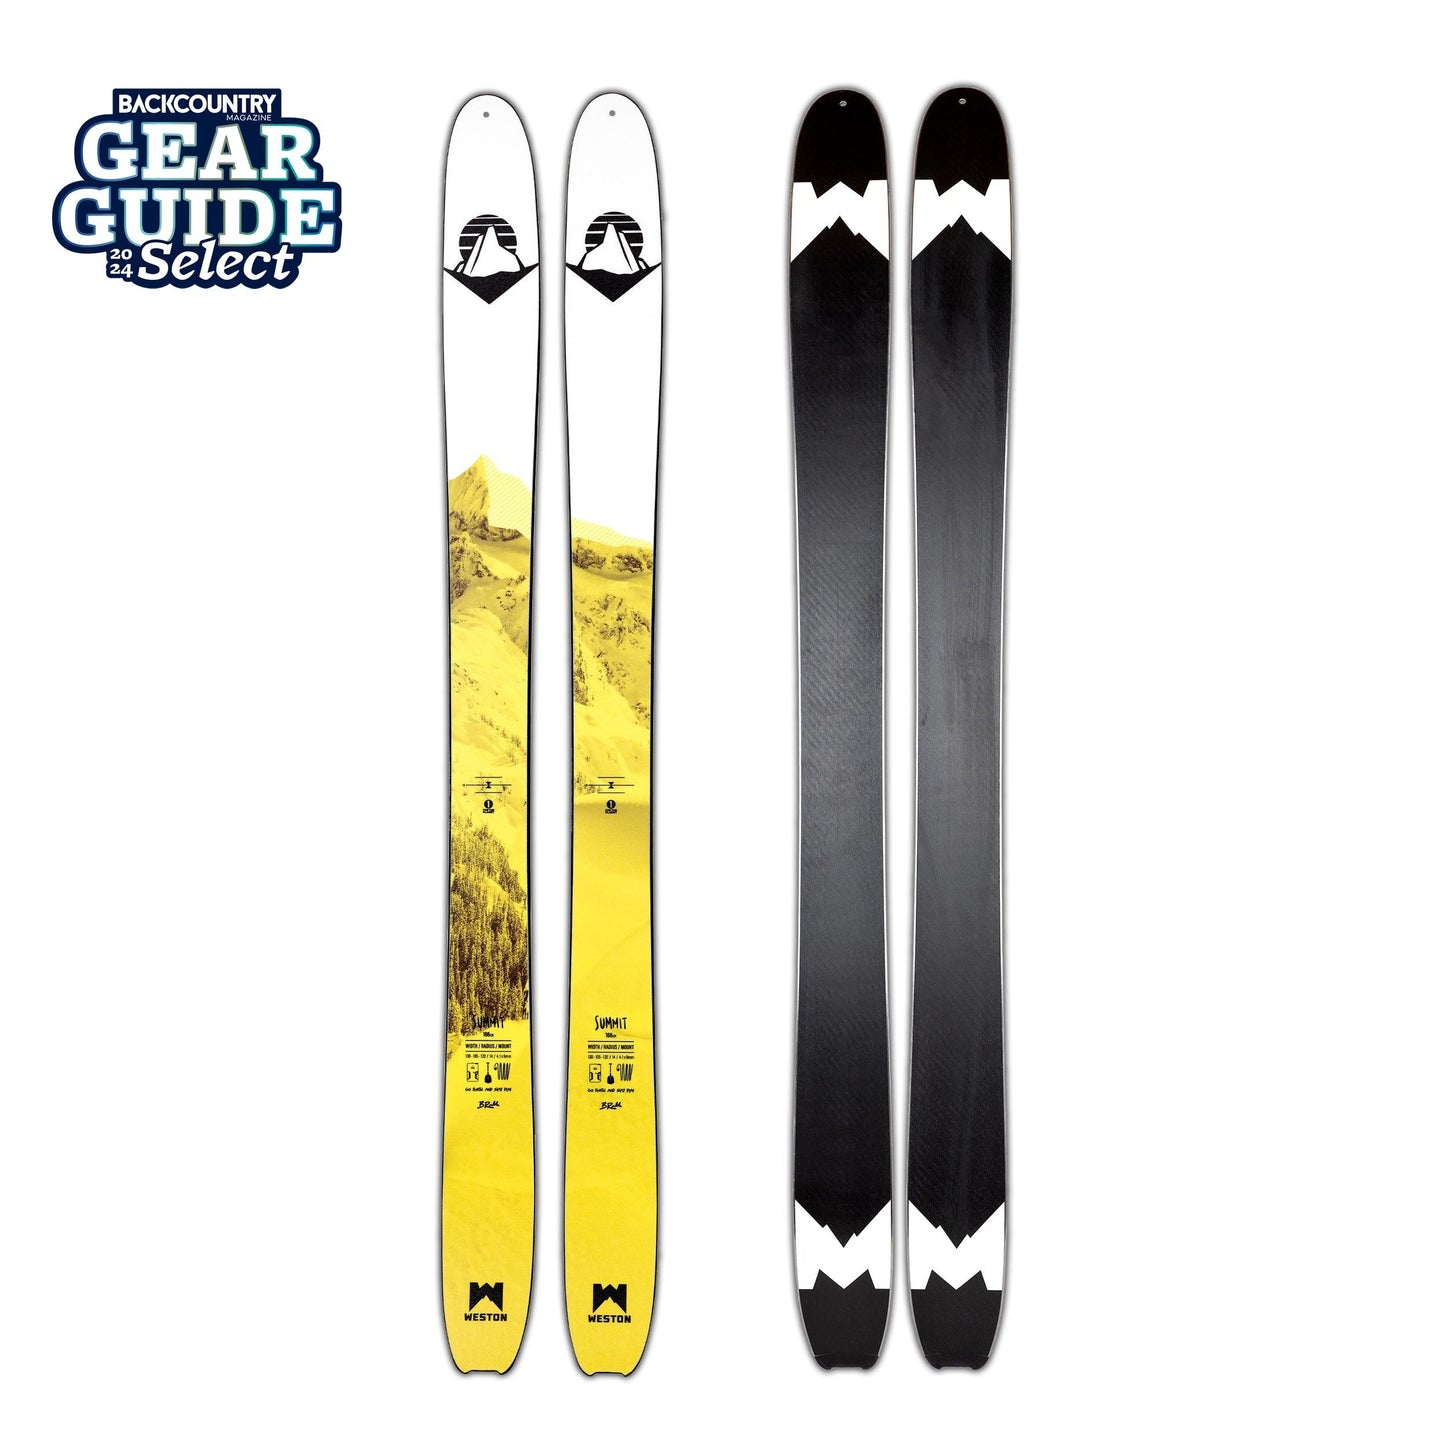 Summit Skis with Touring Bindings (Skins Included)  Demo